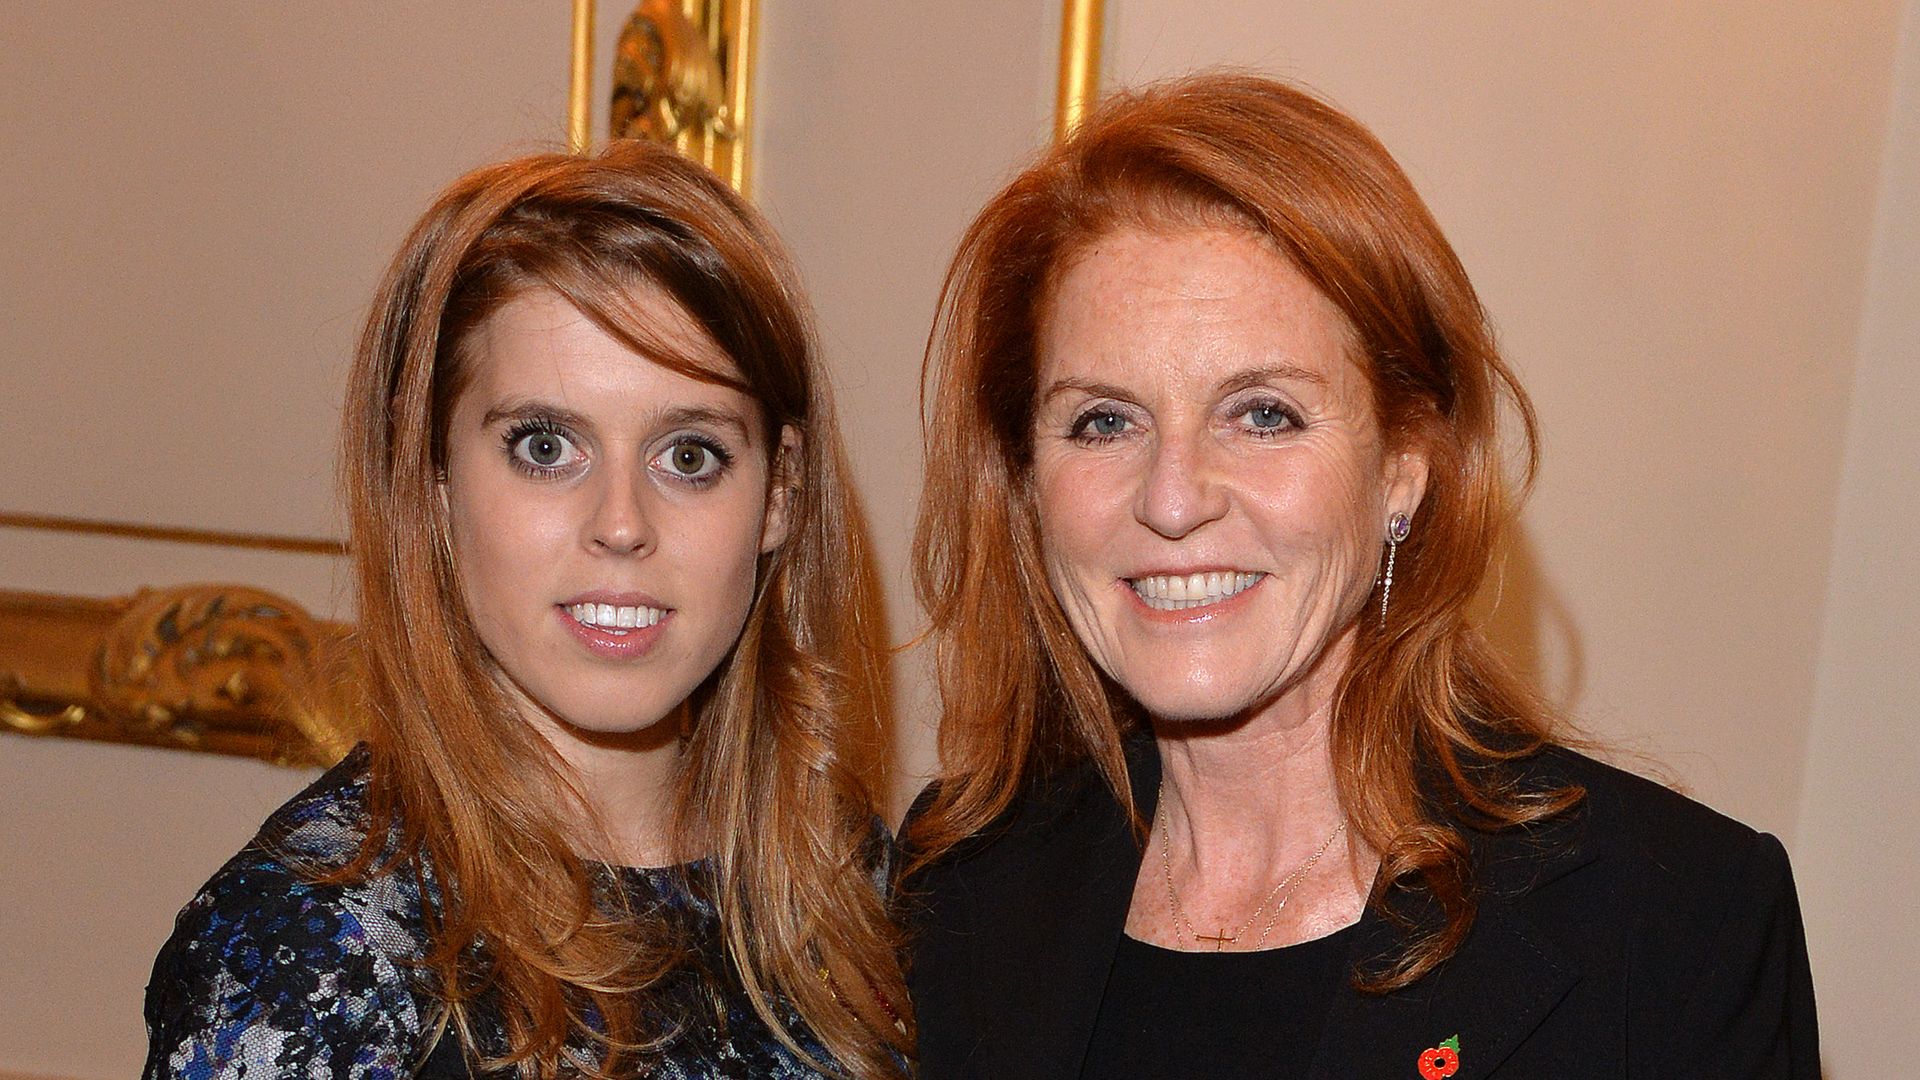 Princess Beatrice shares update on Sarah Ferguson's health in first live interview: 'She's been through so much'